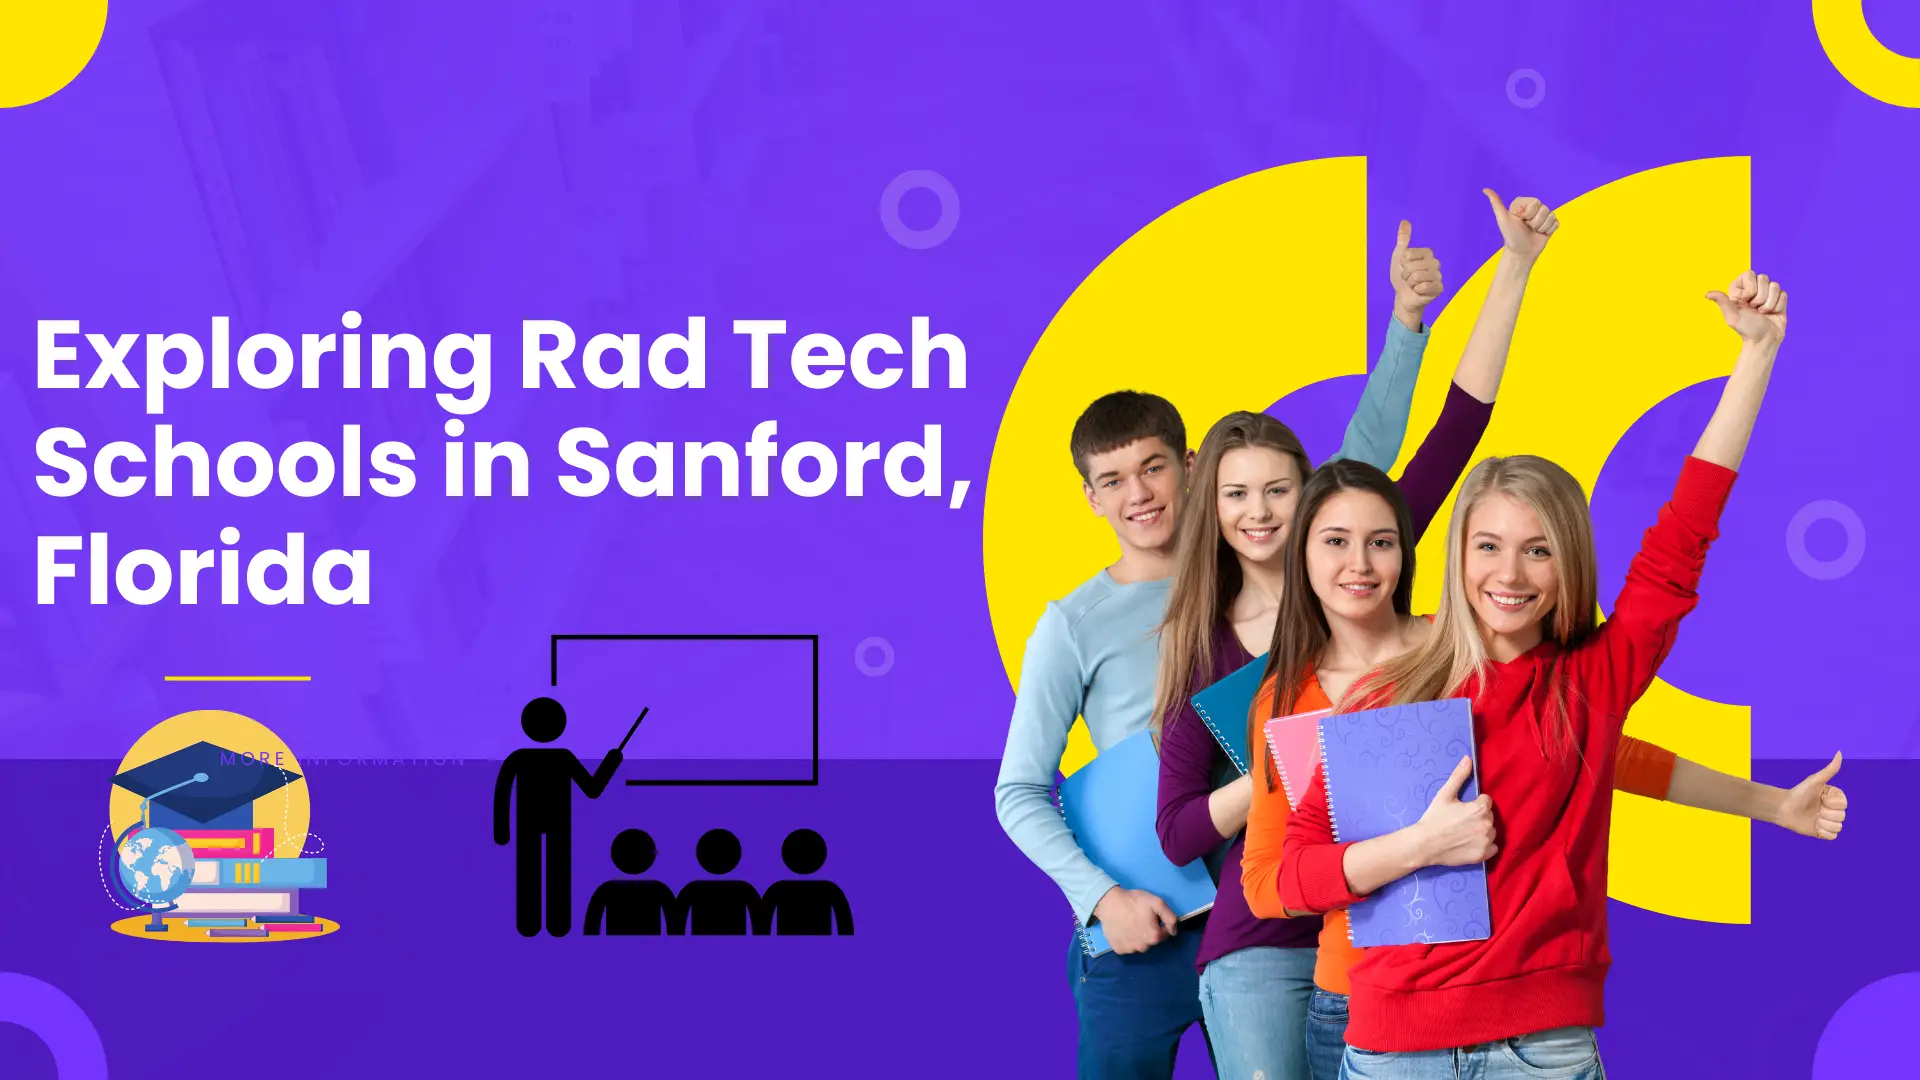 This blog post provides practical advice for those seeking affordable, quality rad tech schools in Sanford, Florida.